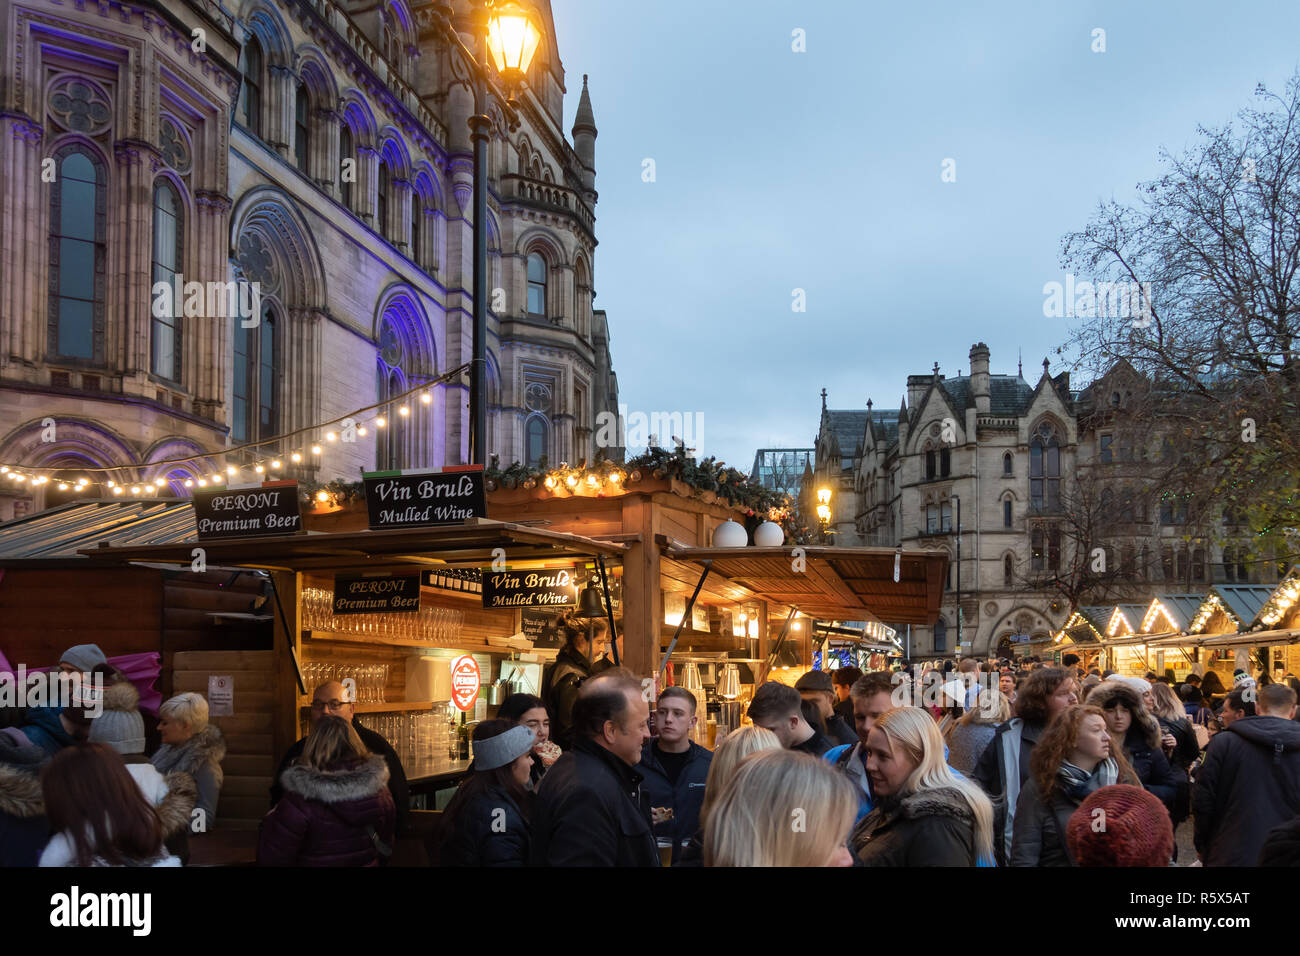 02 December 2018, Manchester Christmas Market, Albert Square.  A stall selling mulled wine & beer to festive shoppers in front of the Town Hall. Stock Photo